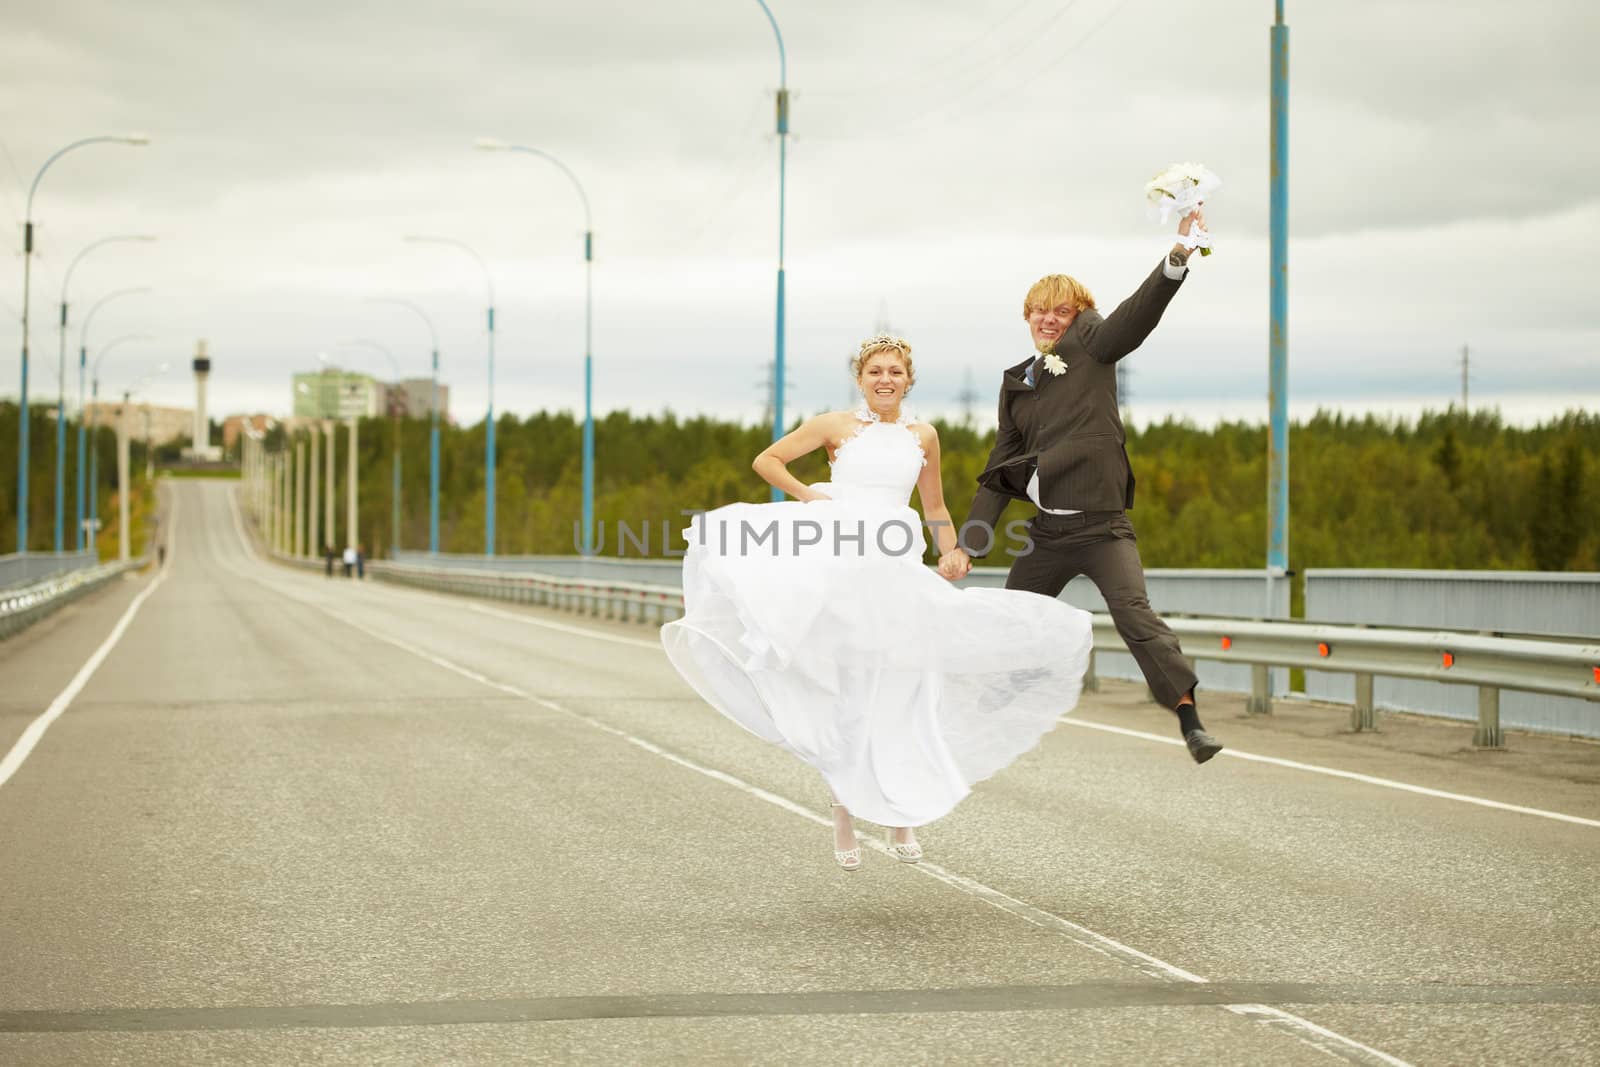 Newly married pair jumps on highway by pzaxe